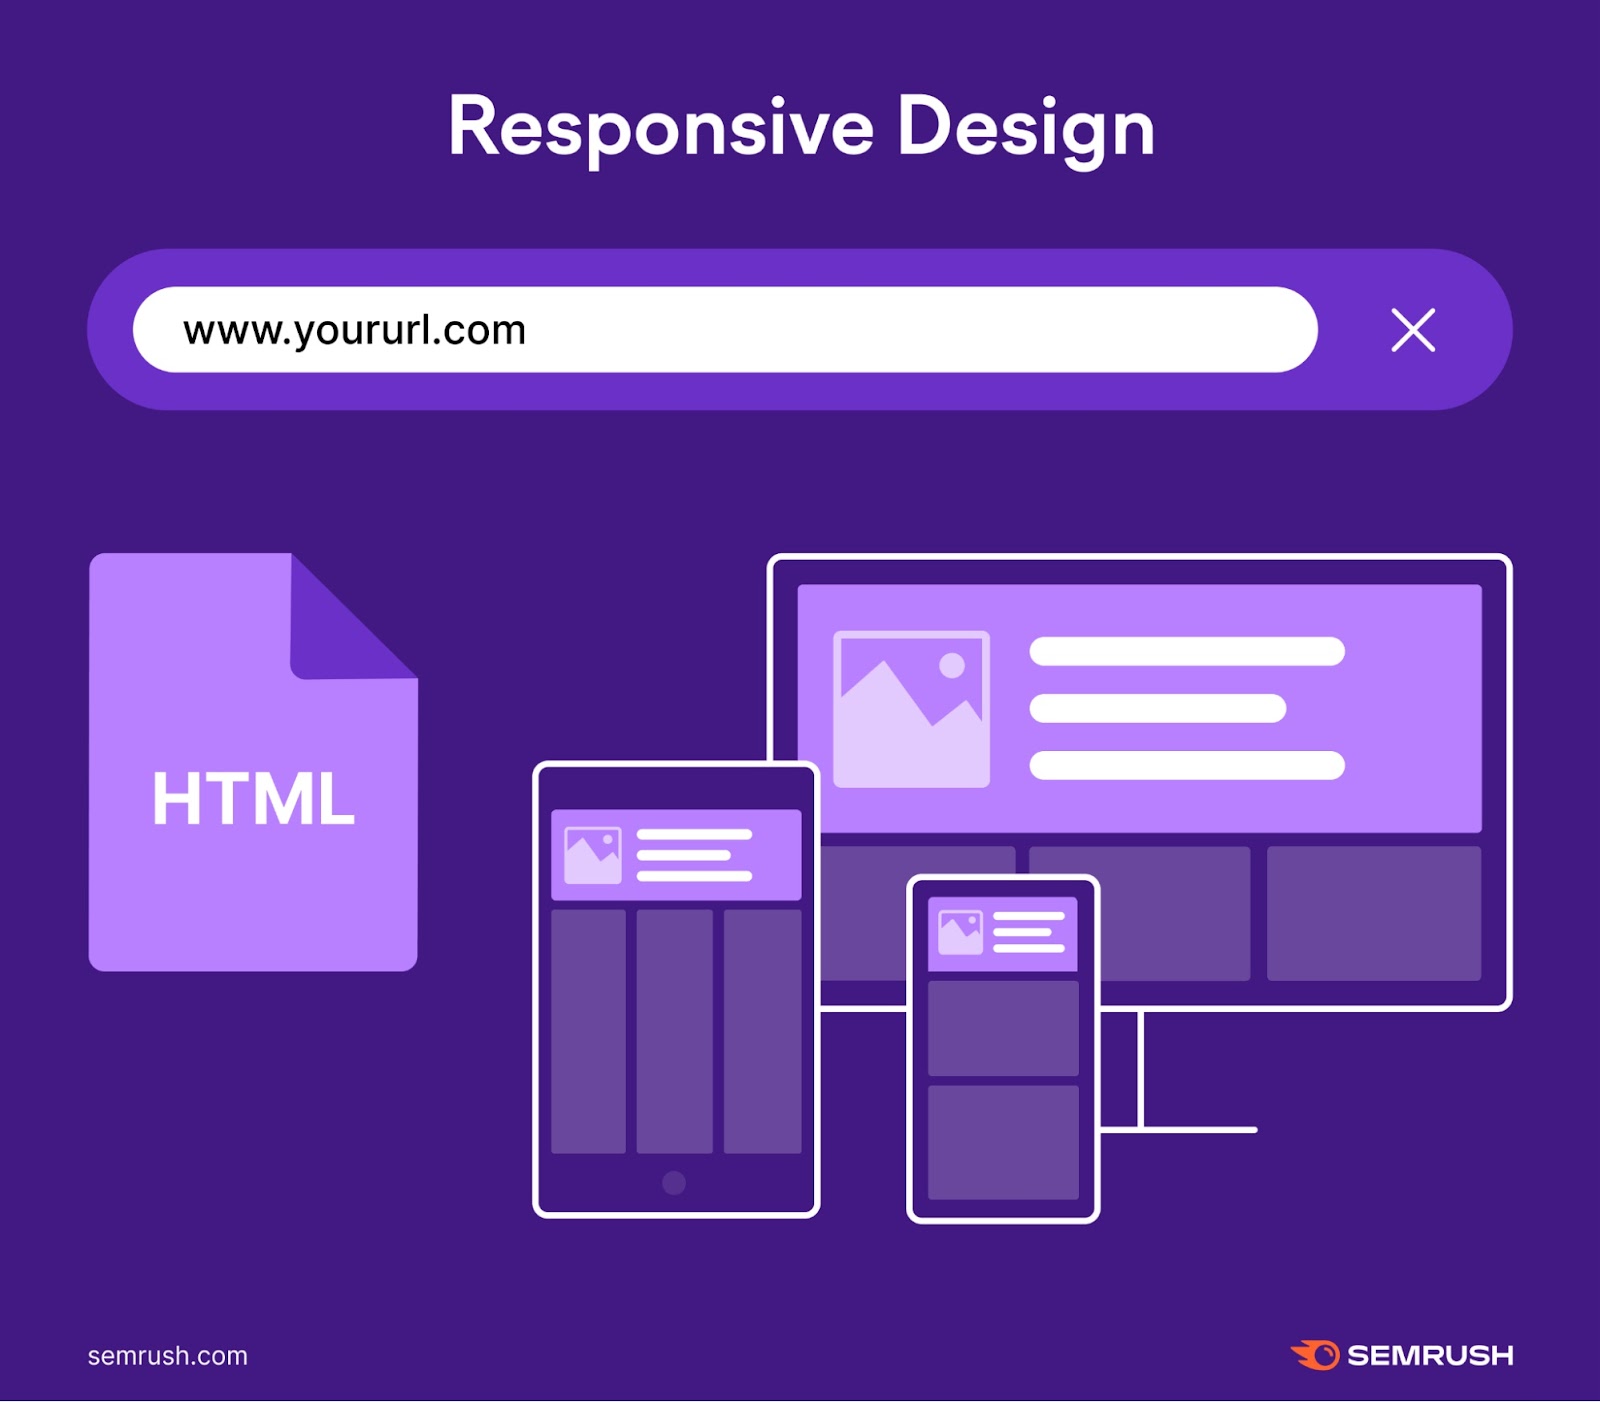 An infographic by Semrush showing how responsive design works